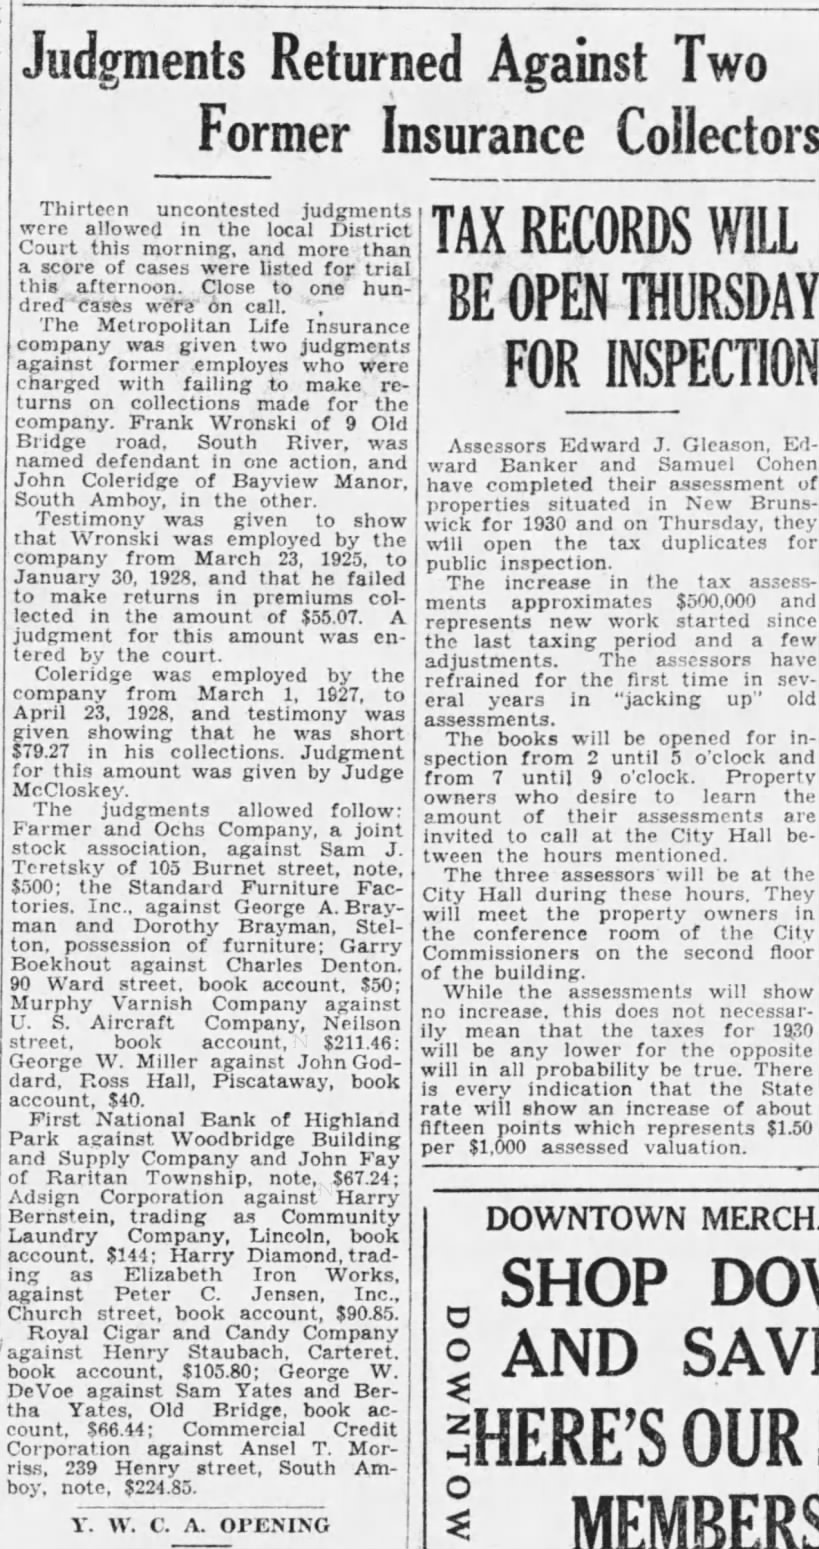 The Central New Jersey Home News (New Brunswick, New Jersey)
16 Dec 1929, Mon
Page 2